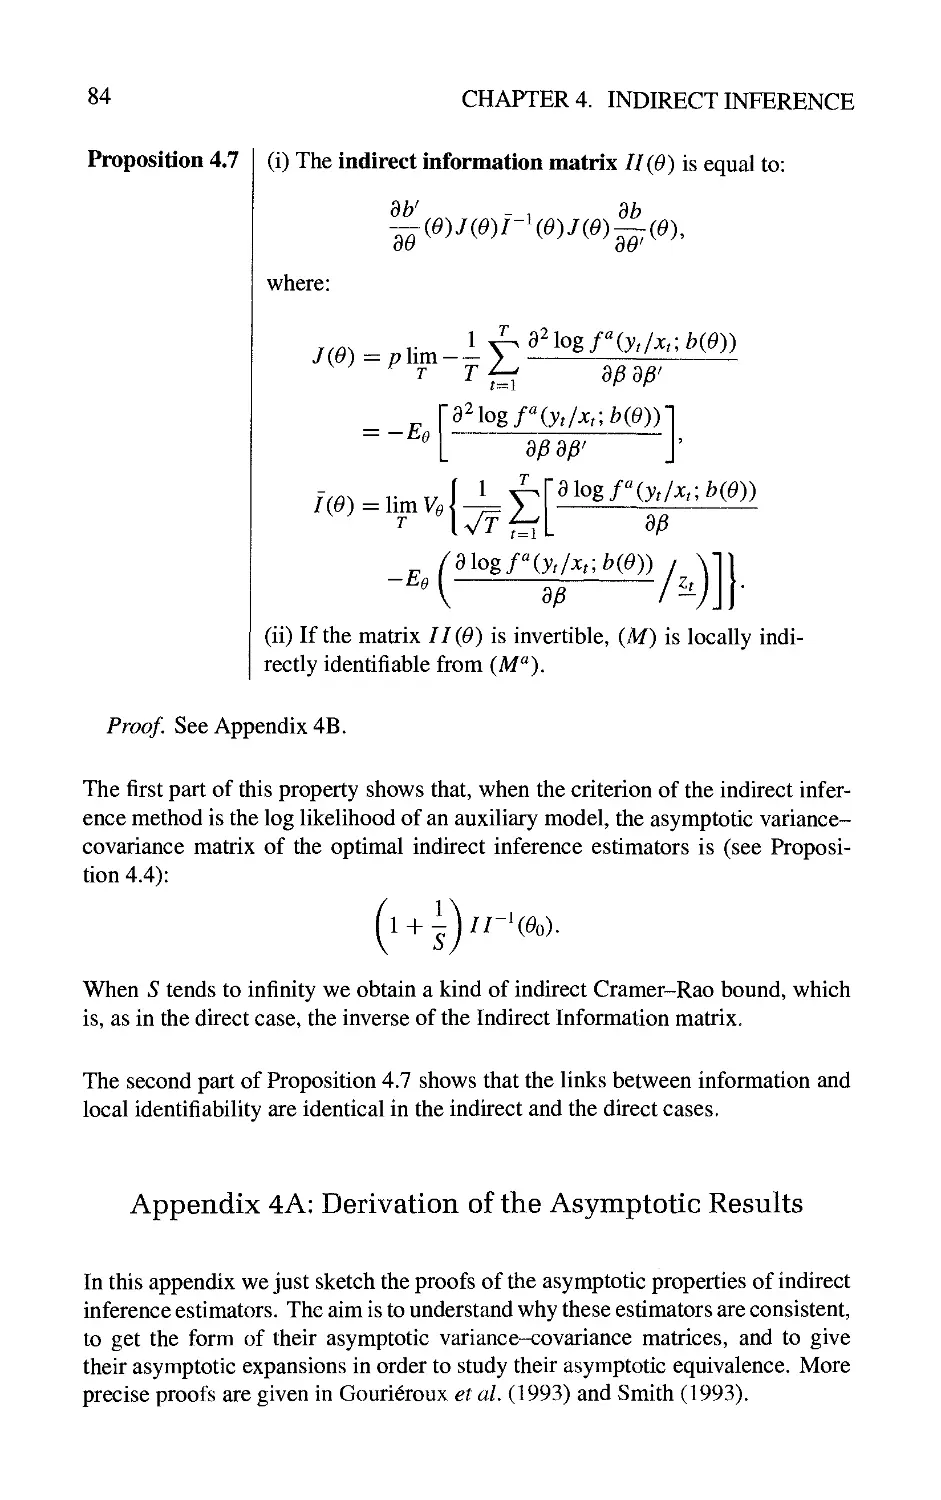 Appendix 4A: Derivation of the Asymptotic Results